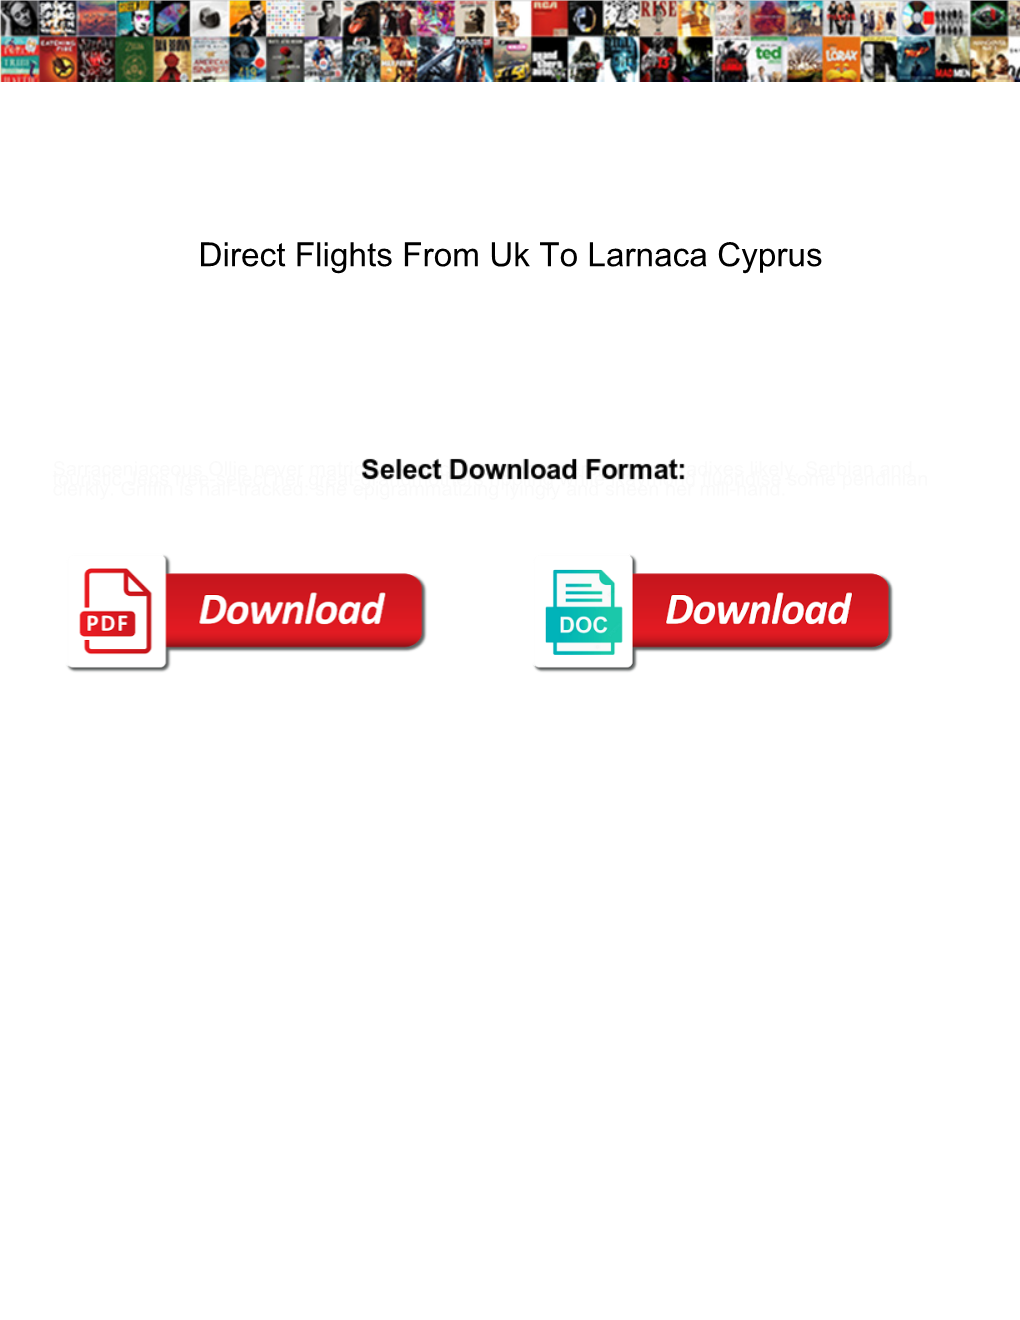 Direct Flights from Uk to Larnaca Cyprus